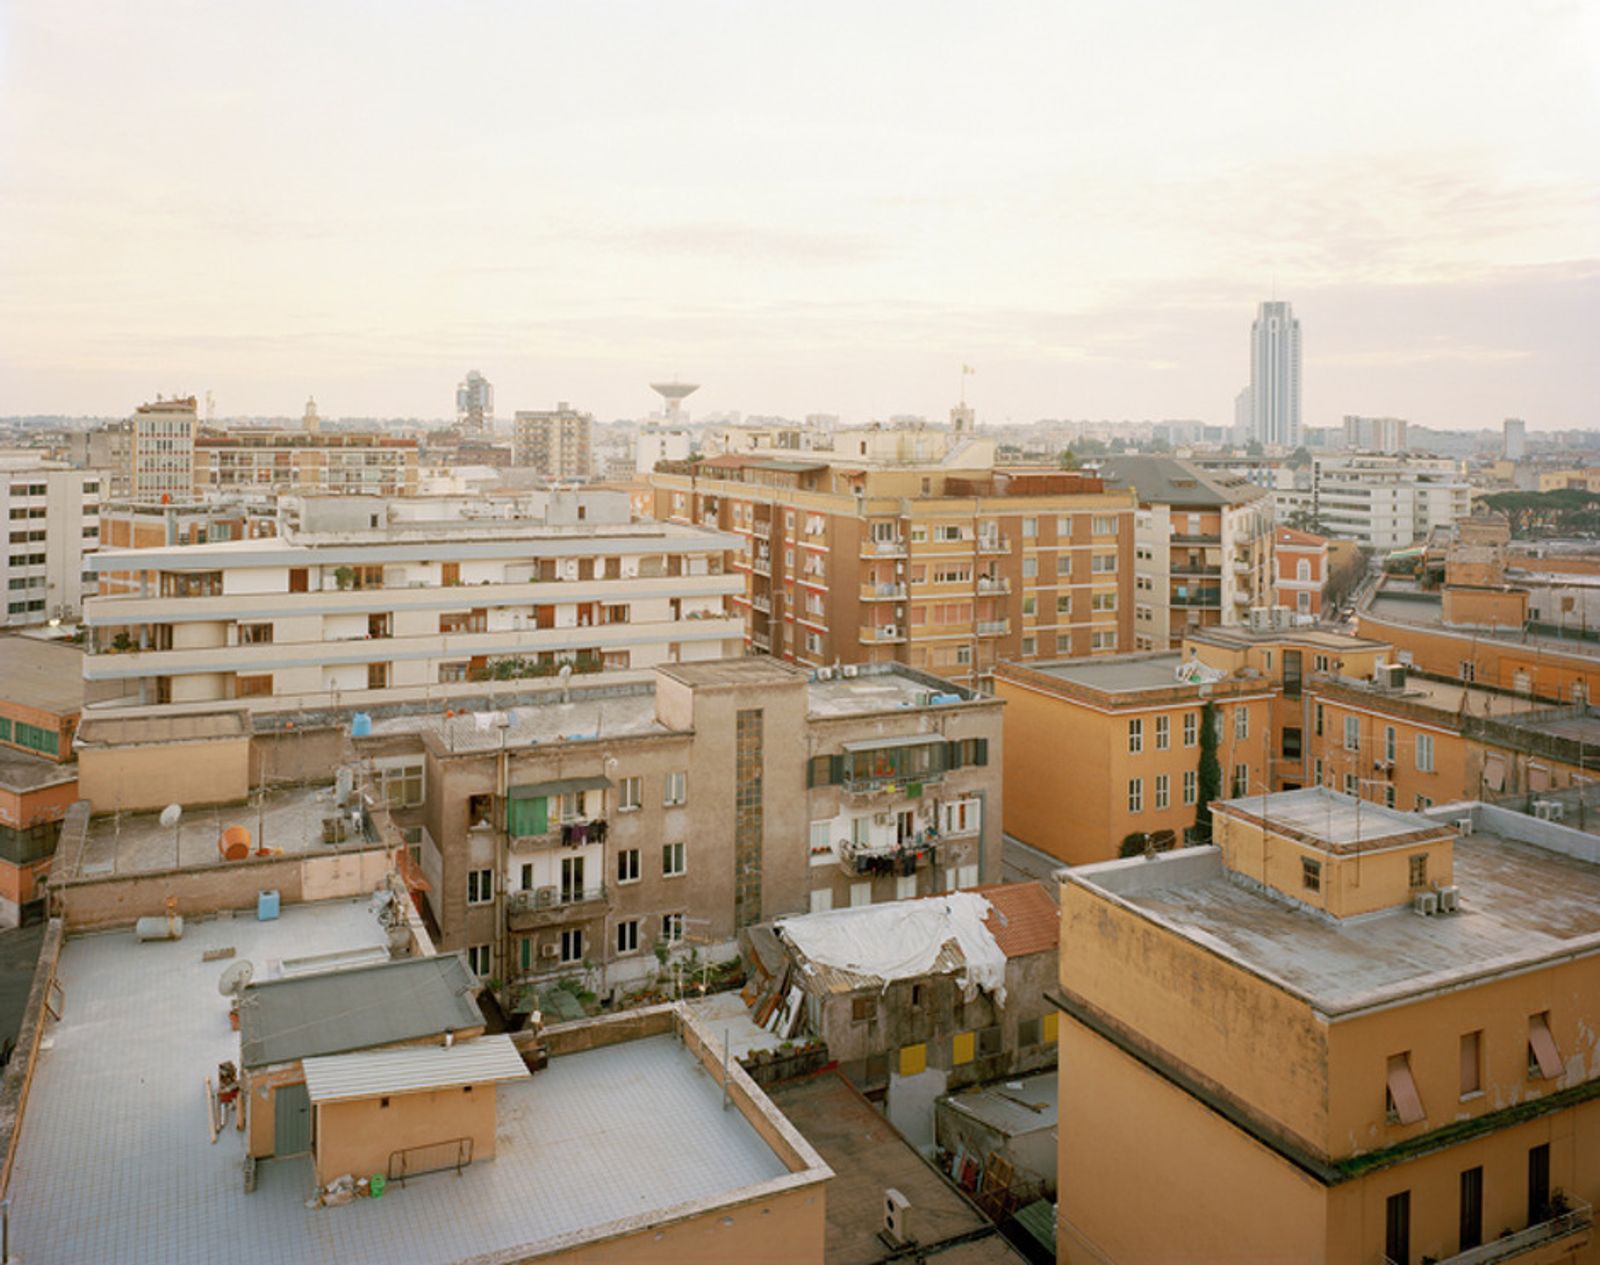 © Gabriele Rossi - Image from the Olim Palus : a new city photography project